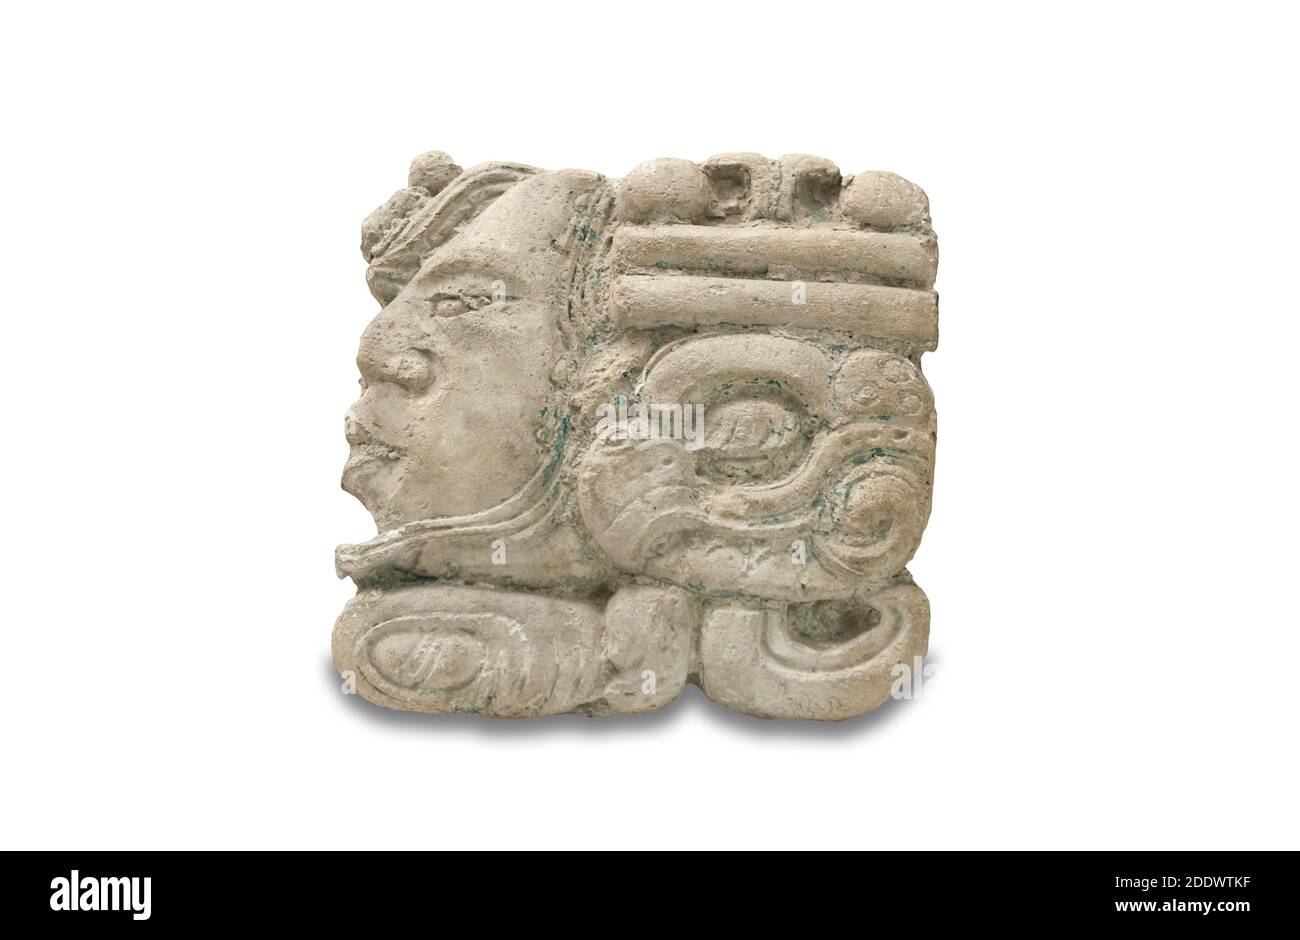 Palenque numeric glyph. Mayan culture, 600 AD. Museum of the Americas, Madrid, Spain Stock Photo